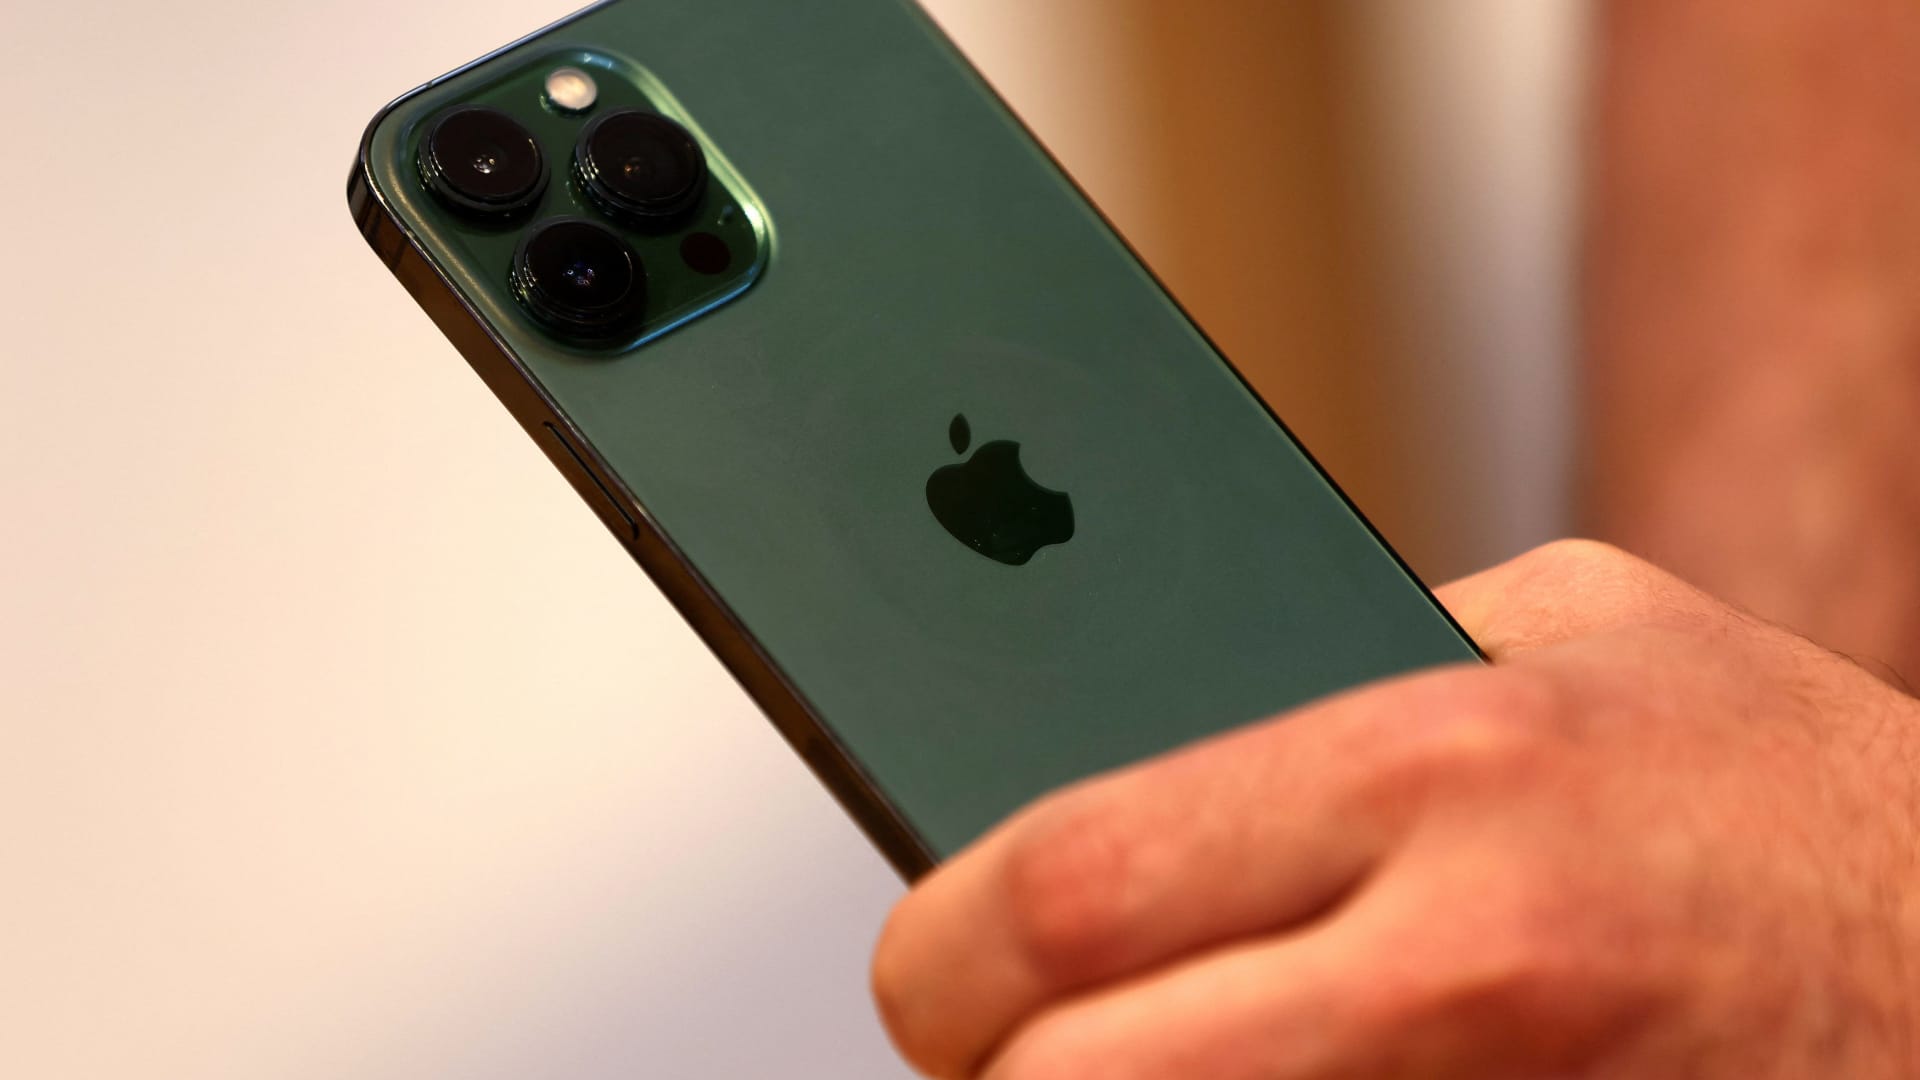 A customers holds the new green colour Apple iPhone 13 pro shortly after it went on sale inside the Apple Store on 5th Avenue in New York, March 18, 2022.